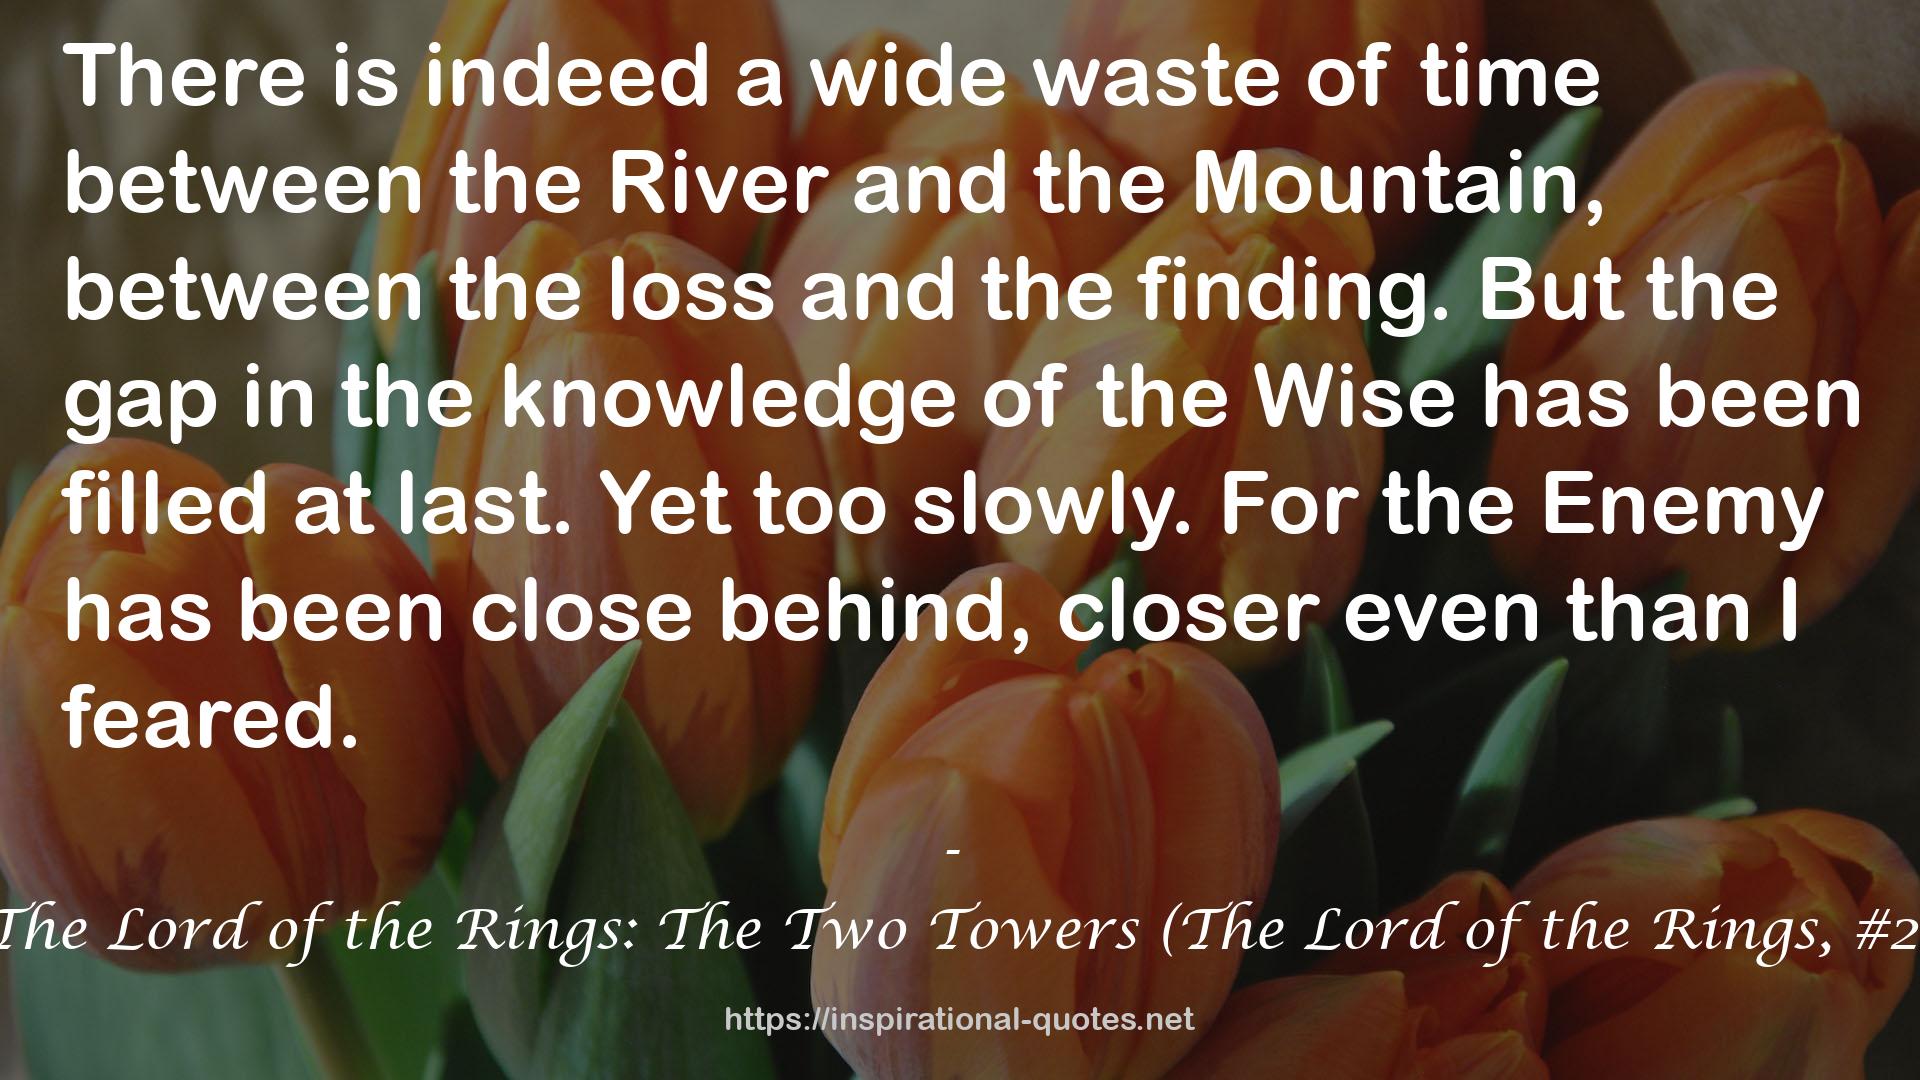 The Lord of the Rings: The Two Towers (The Lord of the Rings, #2) QUOTES